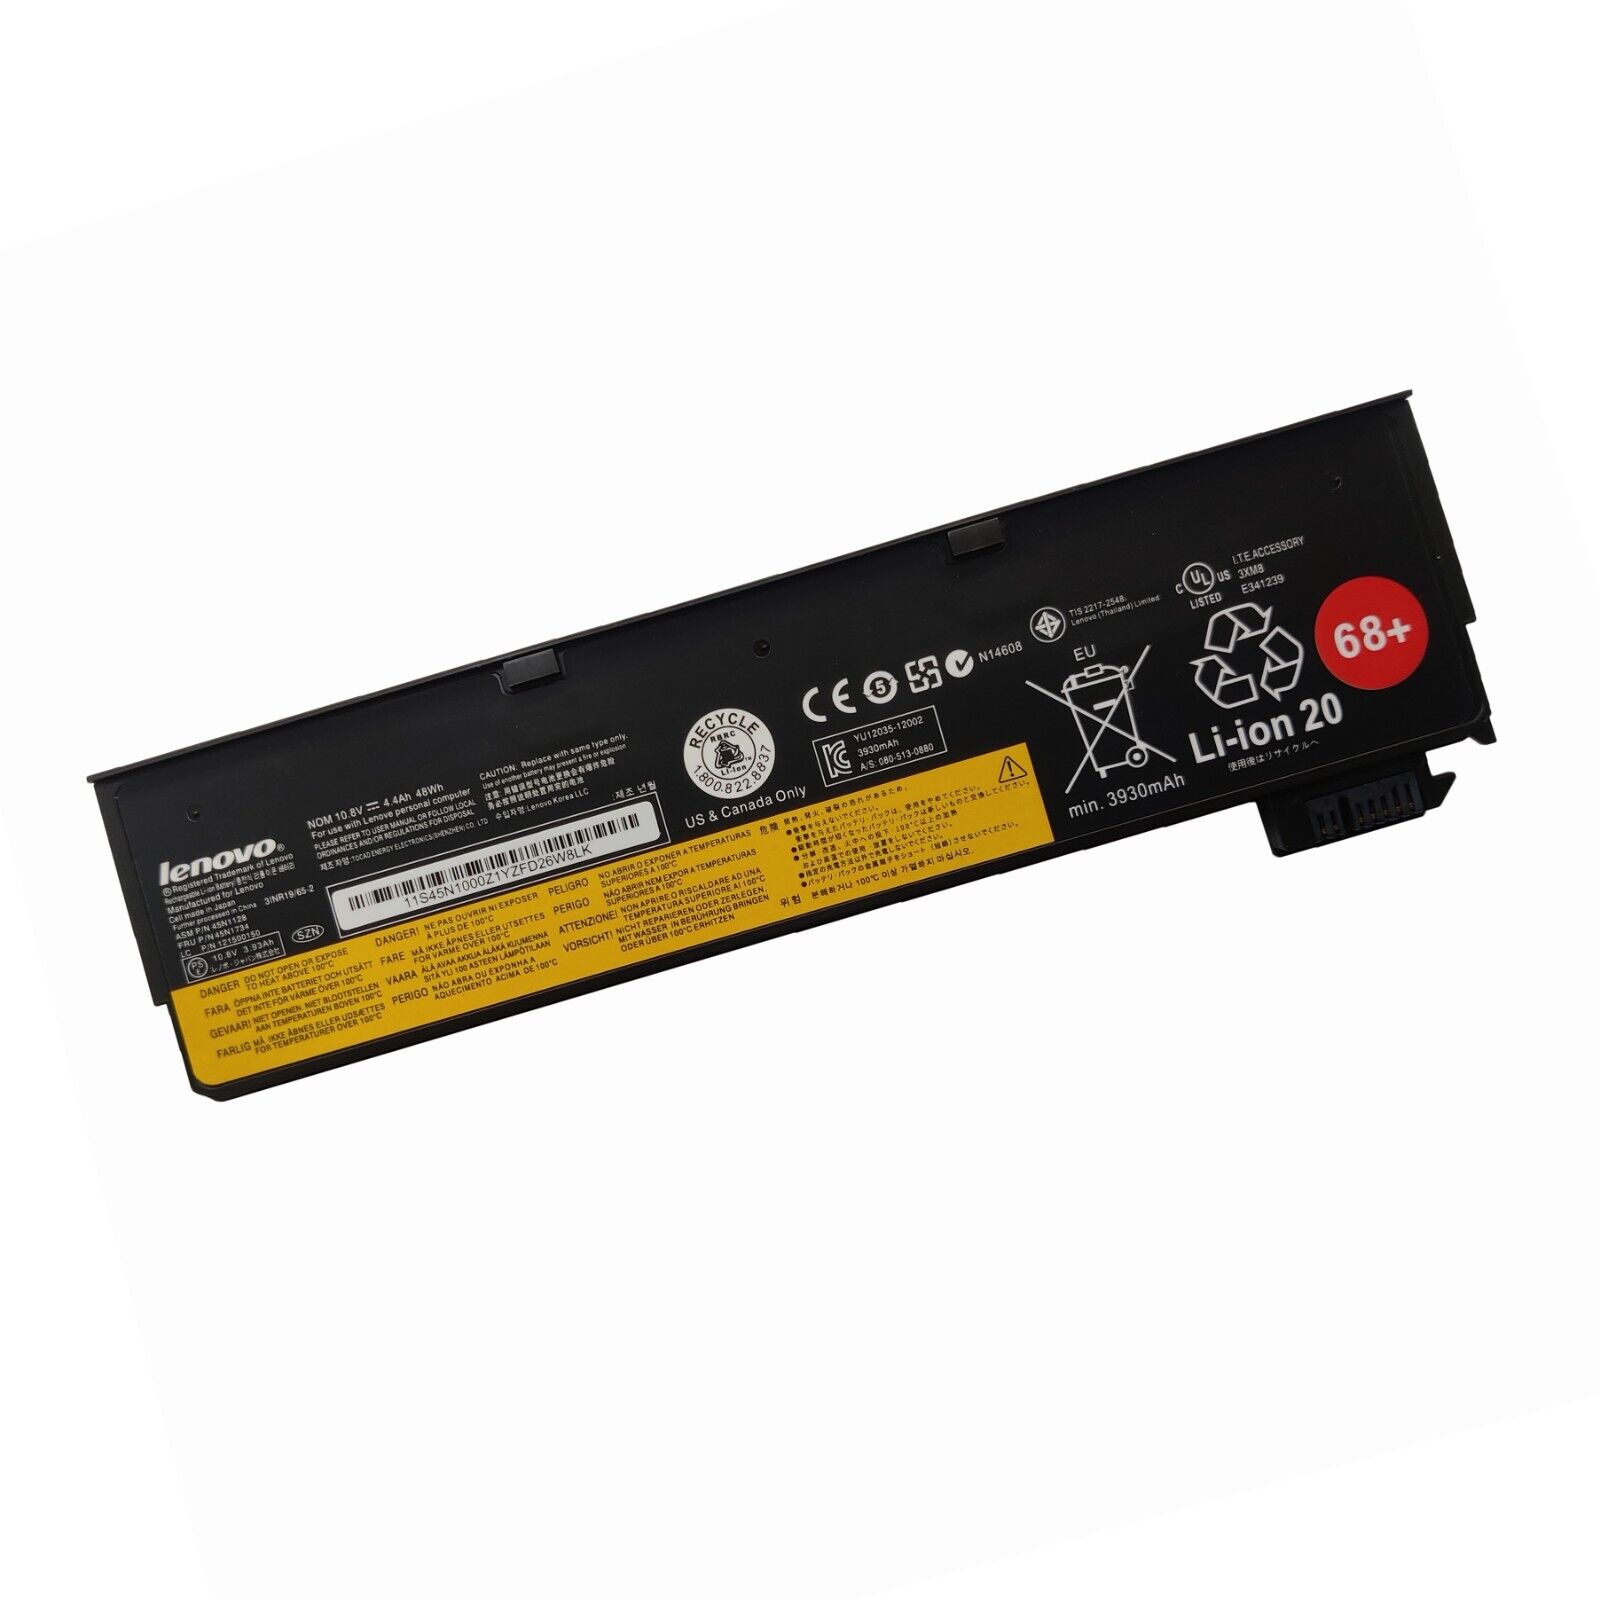 68+ OEM 48WH 6CELL Battery For Lenovo ThinkPad T450 X240 X240s X250 X250S X260